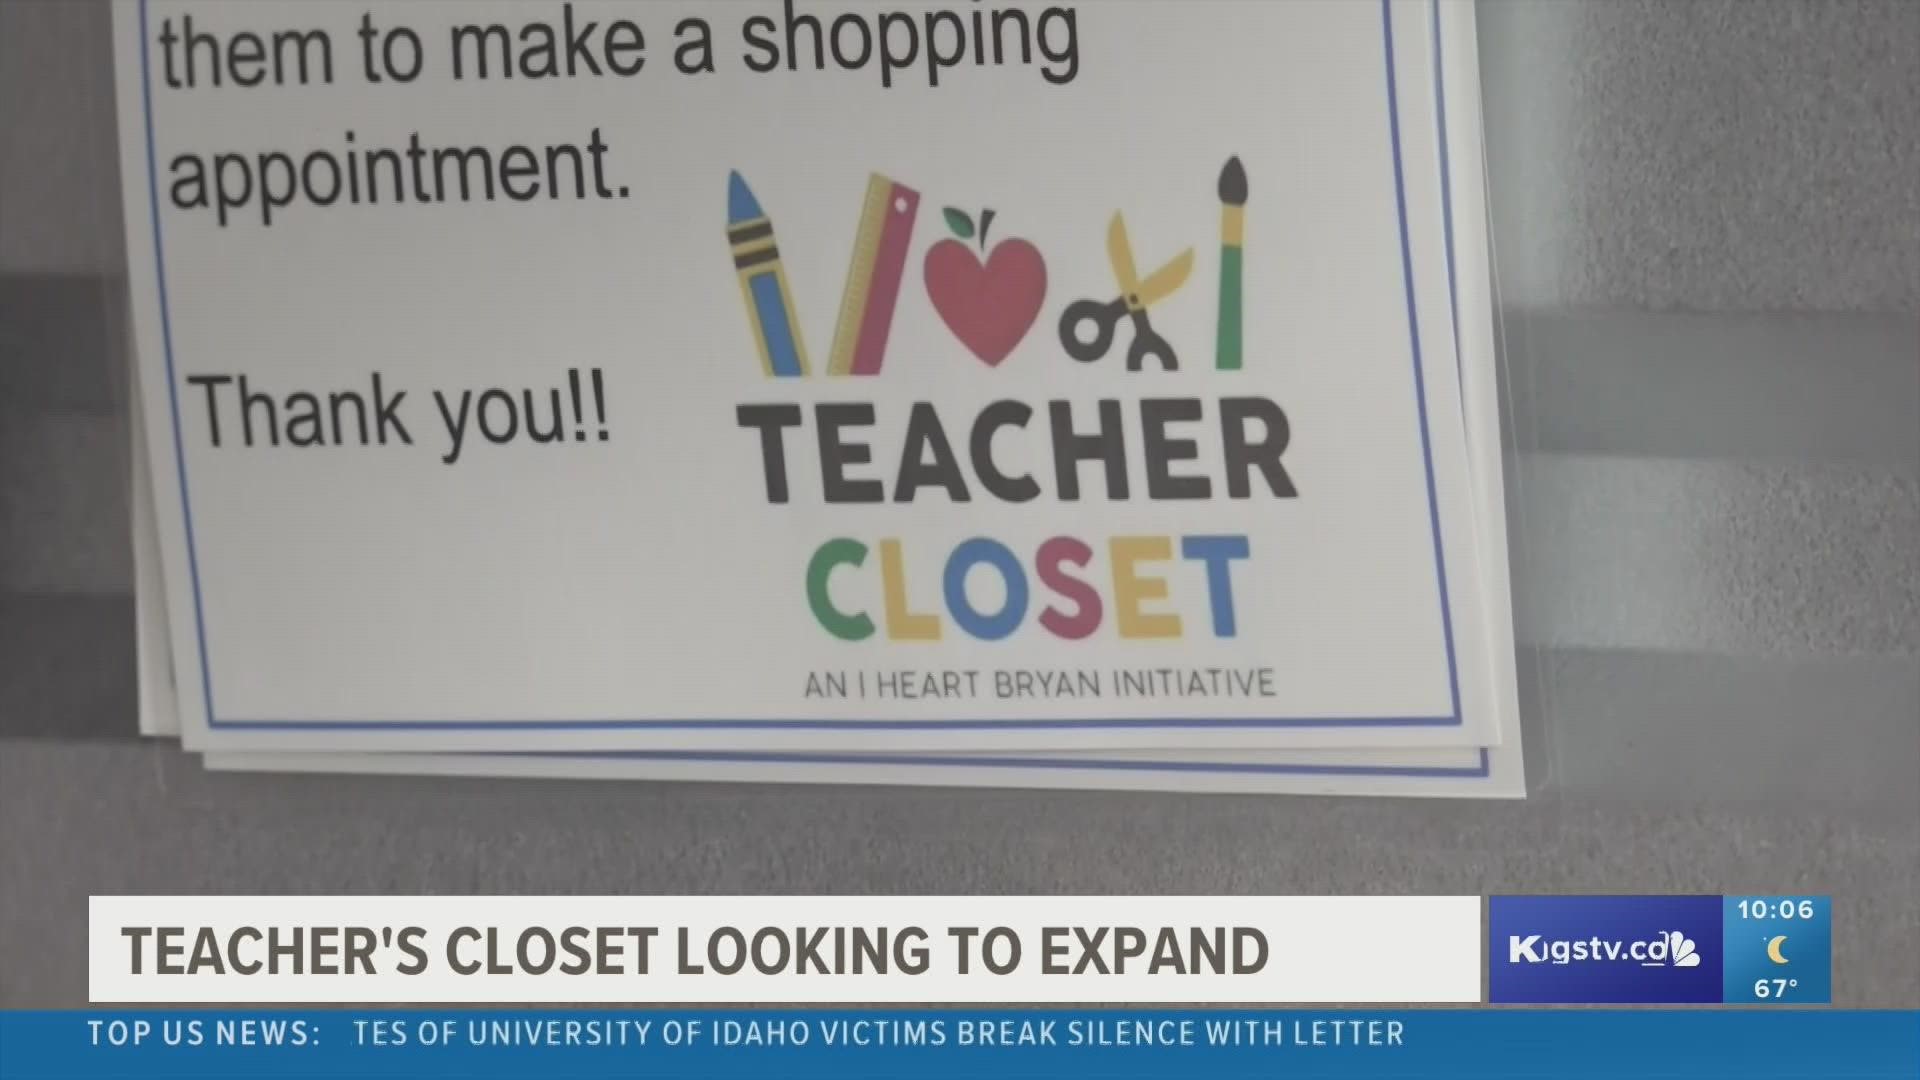 Monica Martinez, team lead at the Teacher's Closet, shared how the closet was created amid a number of struggles faced by teachers.